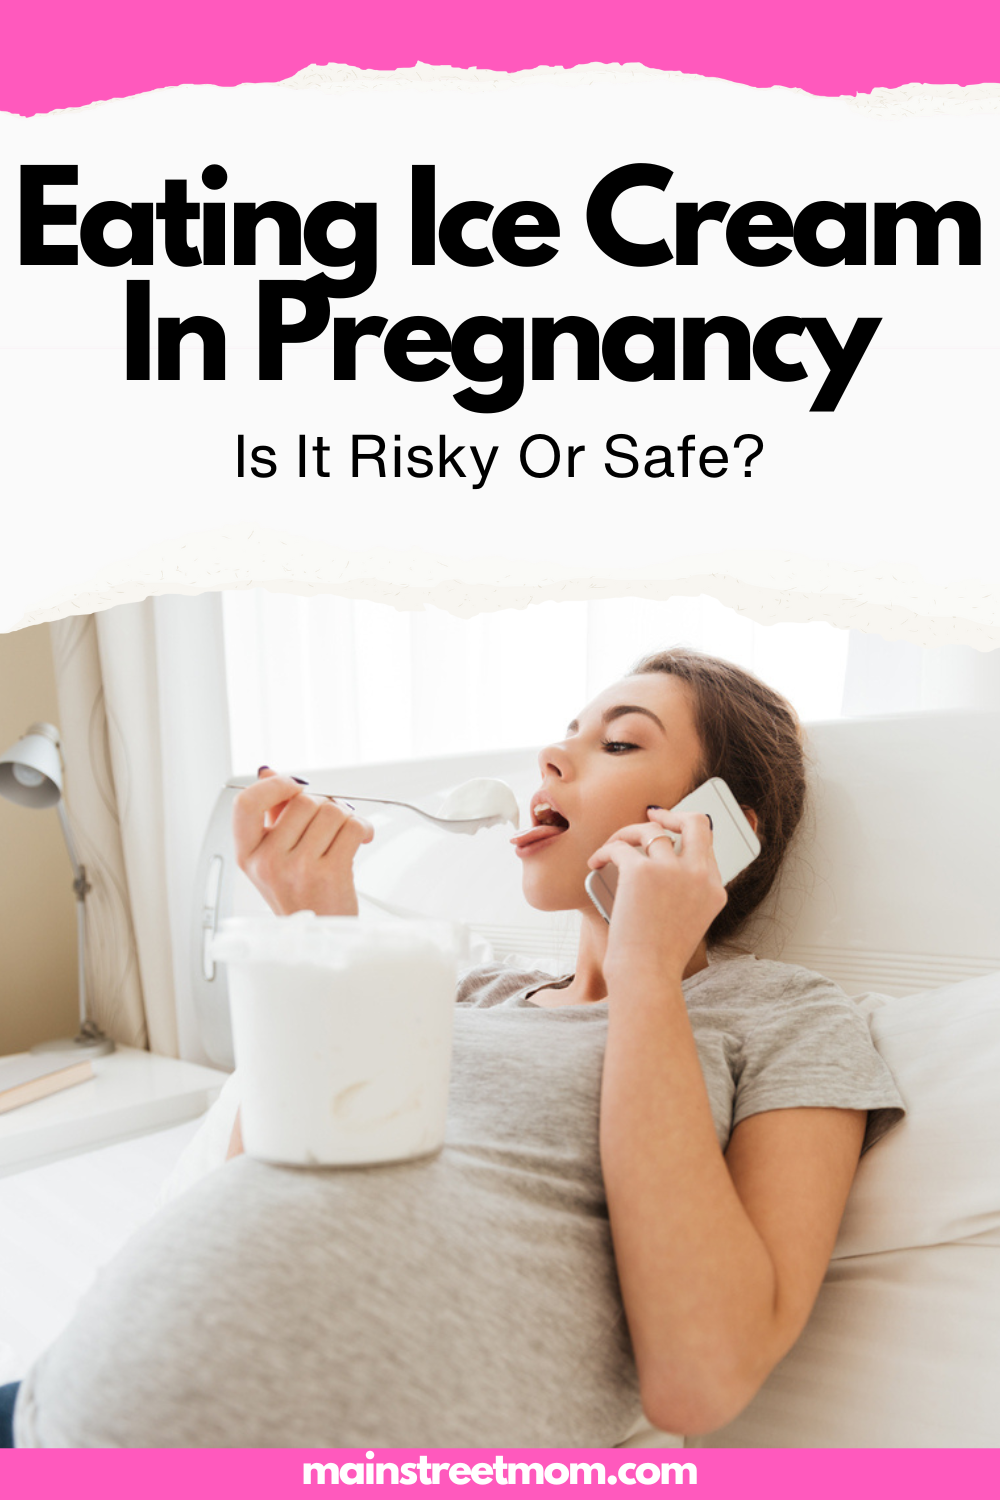 Eating Ice Cream In Pregnancy: Is It Risky Or Safe?